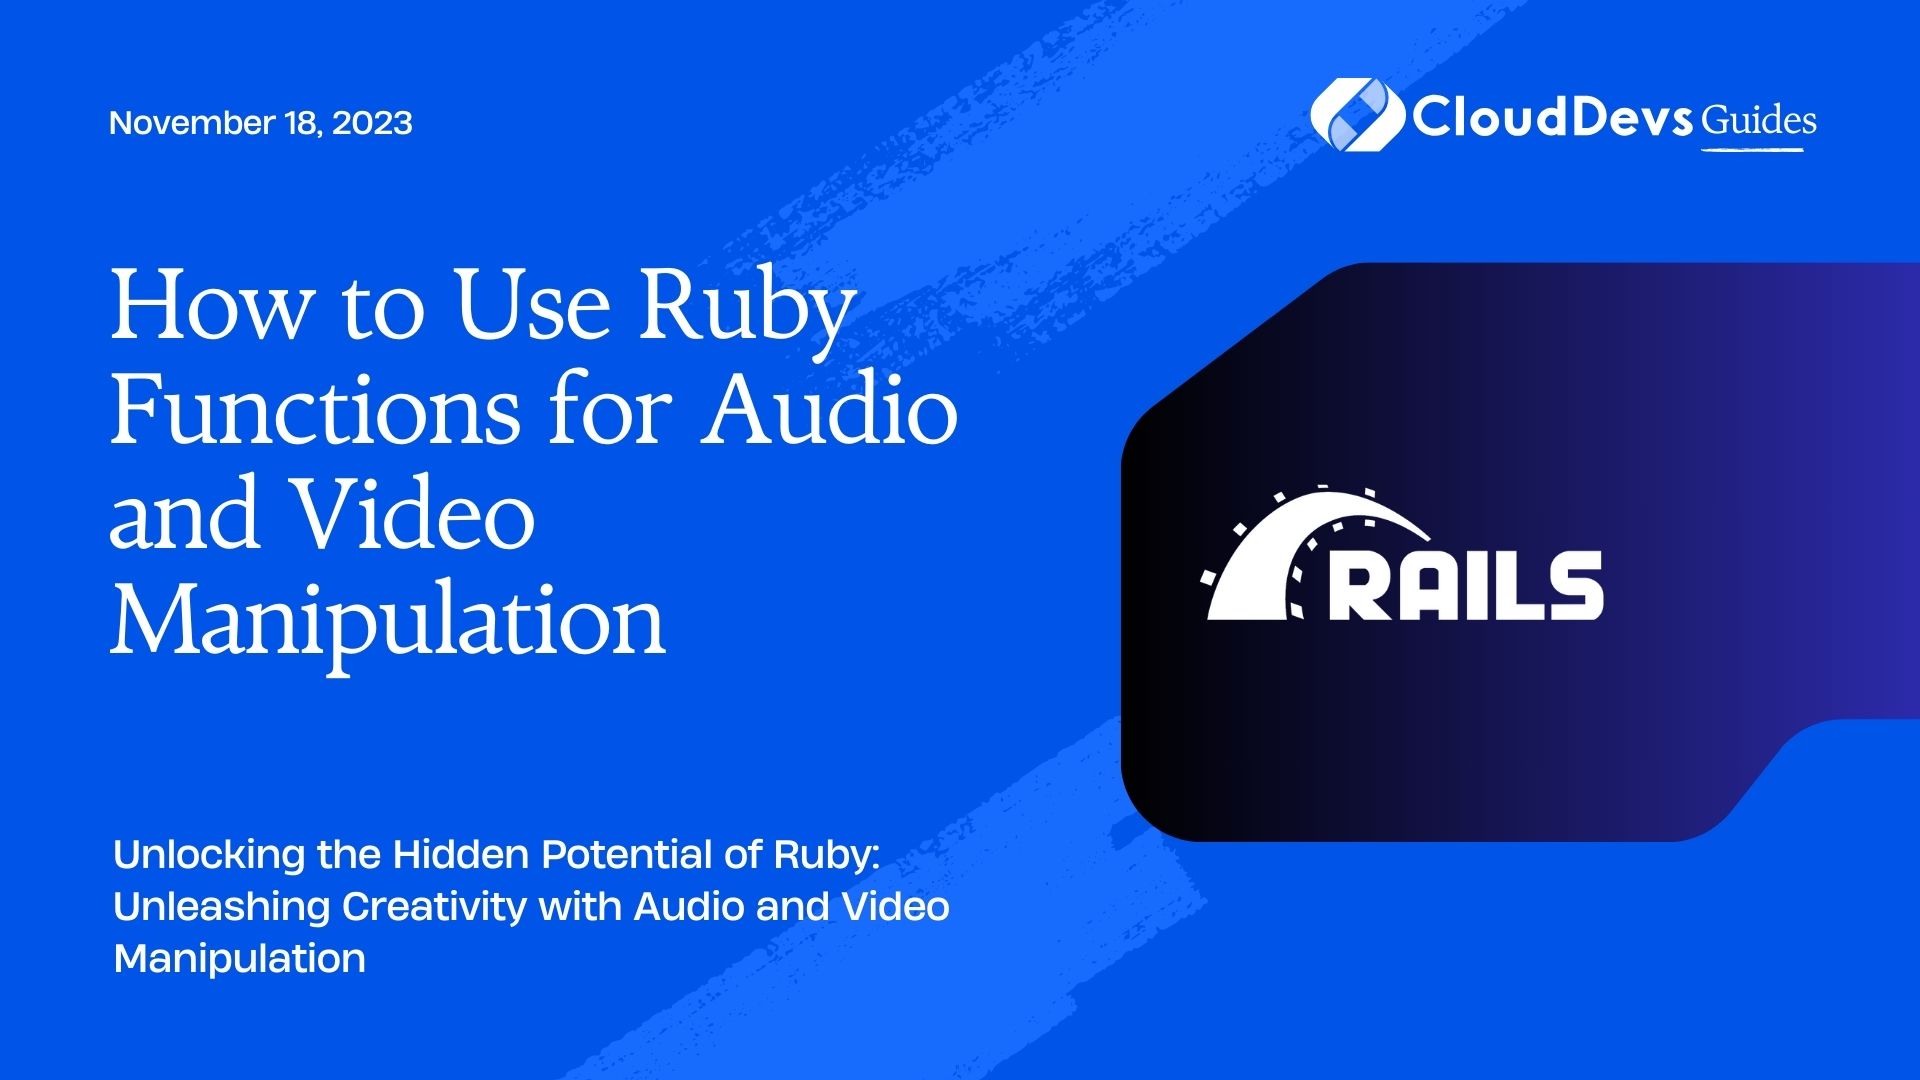 How to Use Ruby Functions for Audio and Video Manipulation